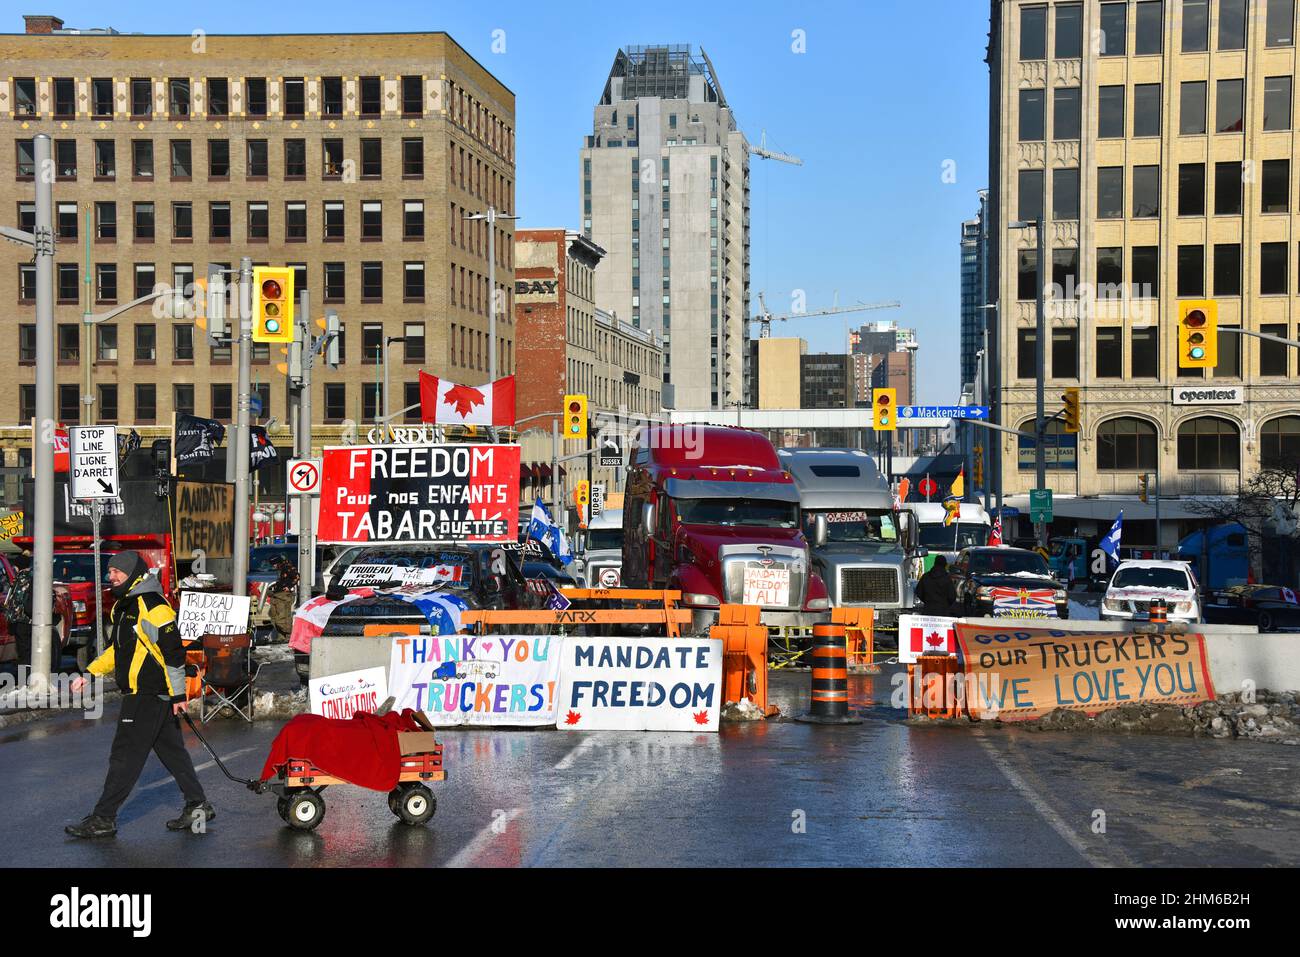 Ottawa, Canada – February 7, 2022: Convoy trucks provide block between Wellington and Rideau streets, a main transit thoroughfare, as part of the trucker convoy protest. The protest has shutdown much of downtown Ottawa and caused a lot of grief for local residents and business. Stock Photo